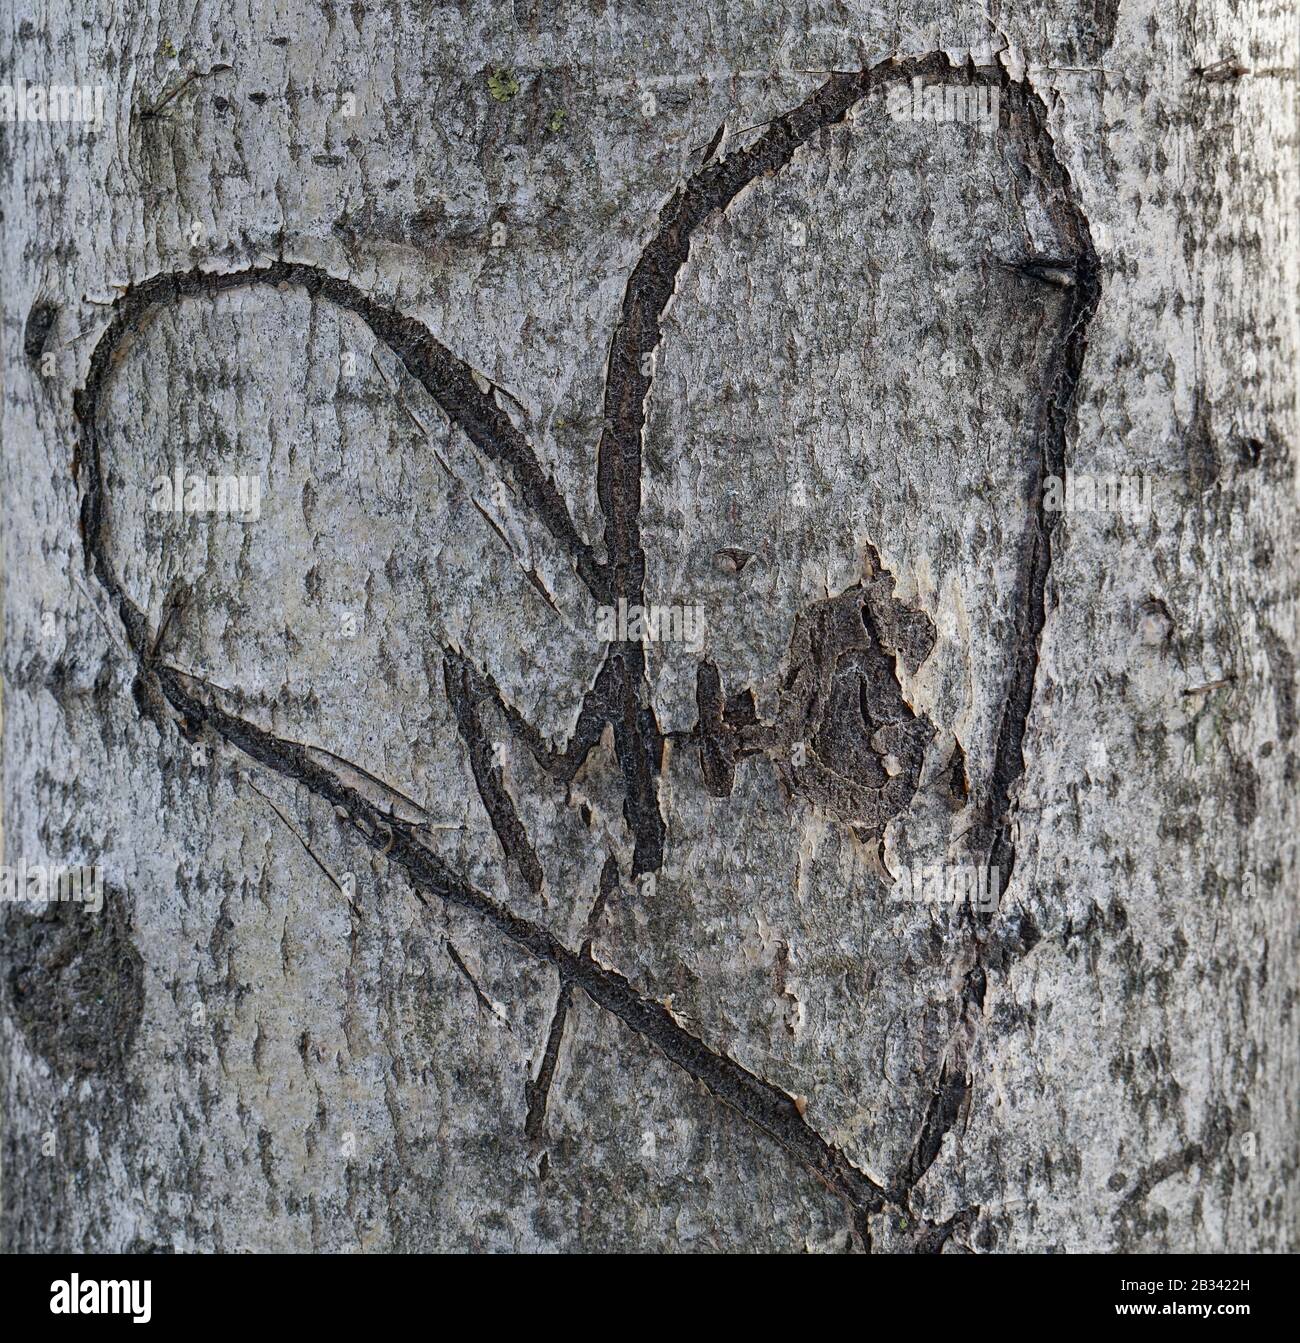 On a trunk of an aspen tree with a knife, a love heart and letters are carved Stock Photo